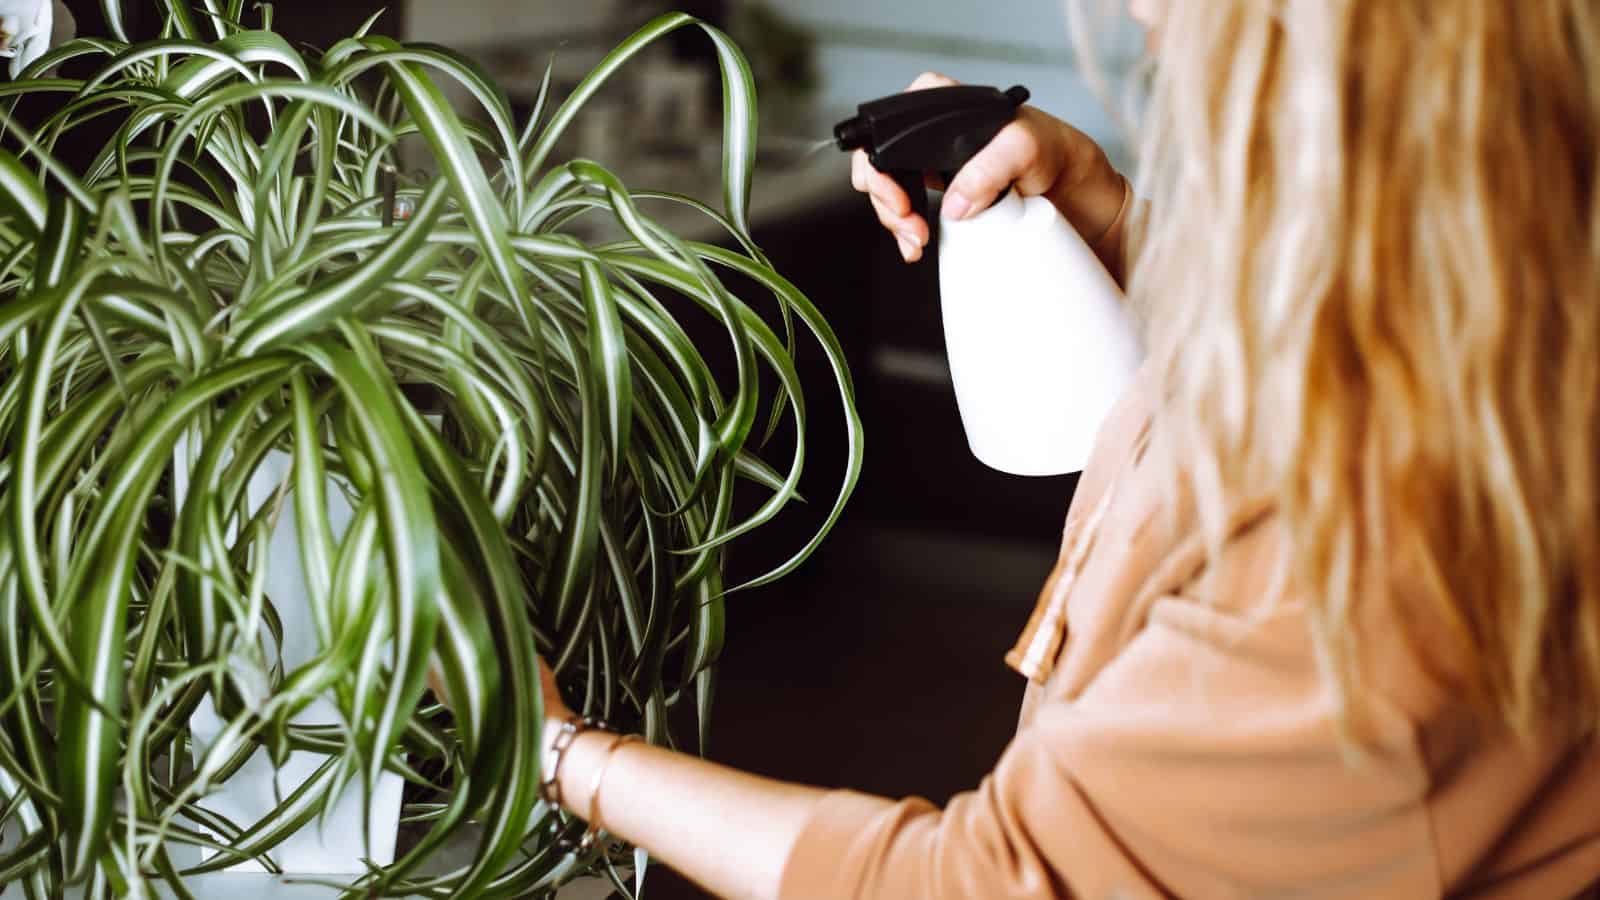 <p>Houseplants are great additions to a space, but the pests they attract are not. Dawn dish soap can be a deterrent for those annoying pests that plague your healthy houseplants. Mix a few drops of Dawn dish soap into a spray bottle of water and apply directly to the leaves. Voila, no more pesky pests!</p>